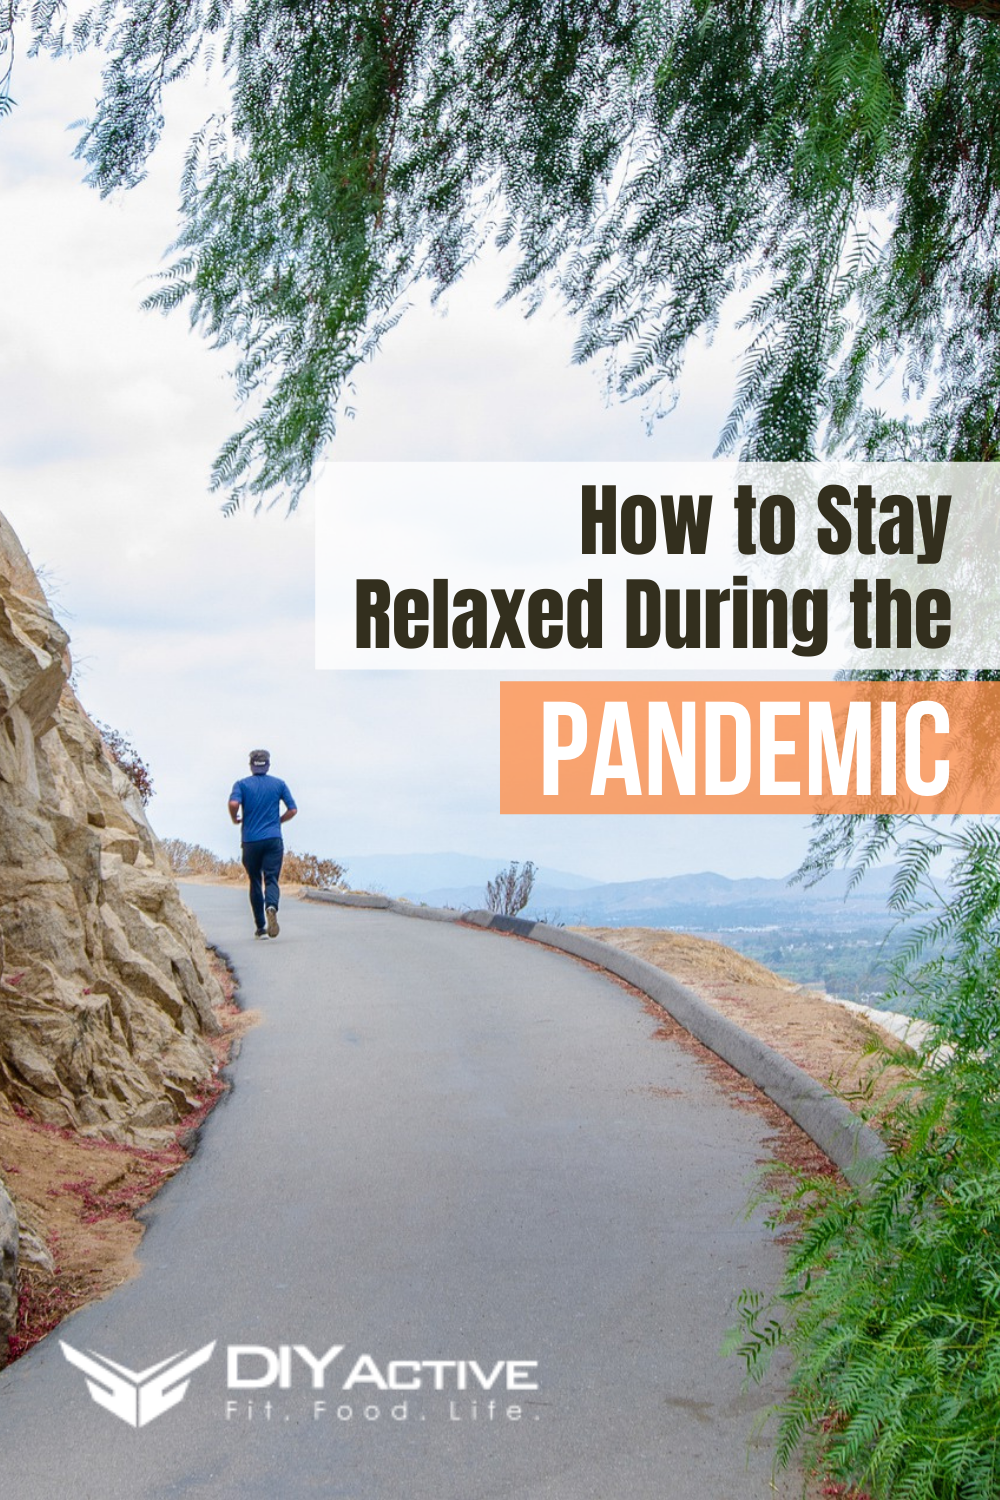 How to Stay Relaxed During the Pandemic